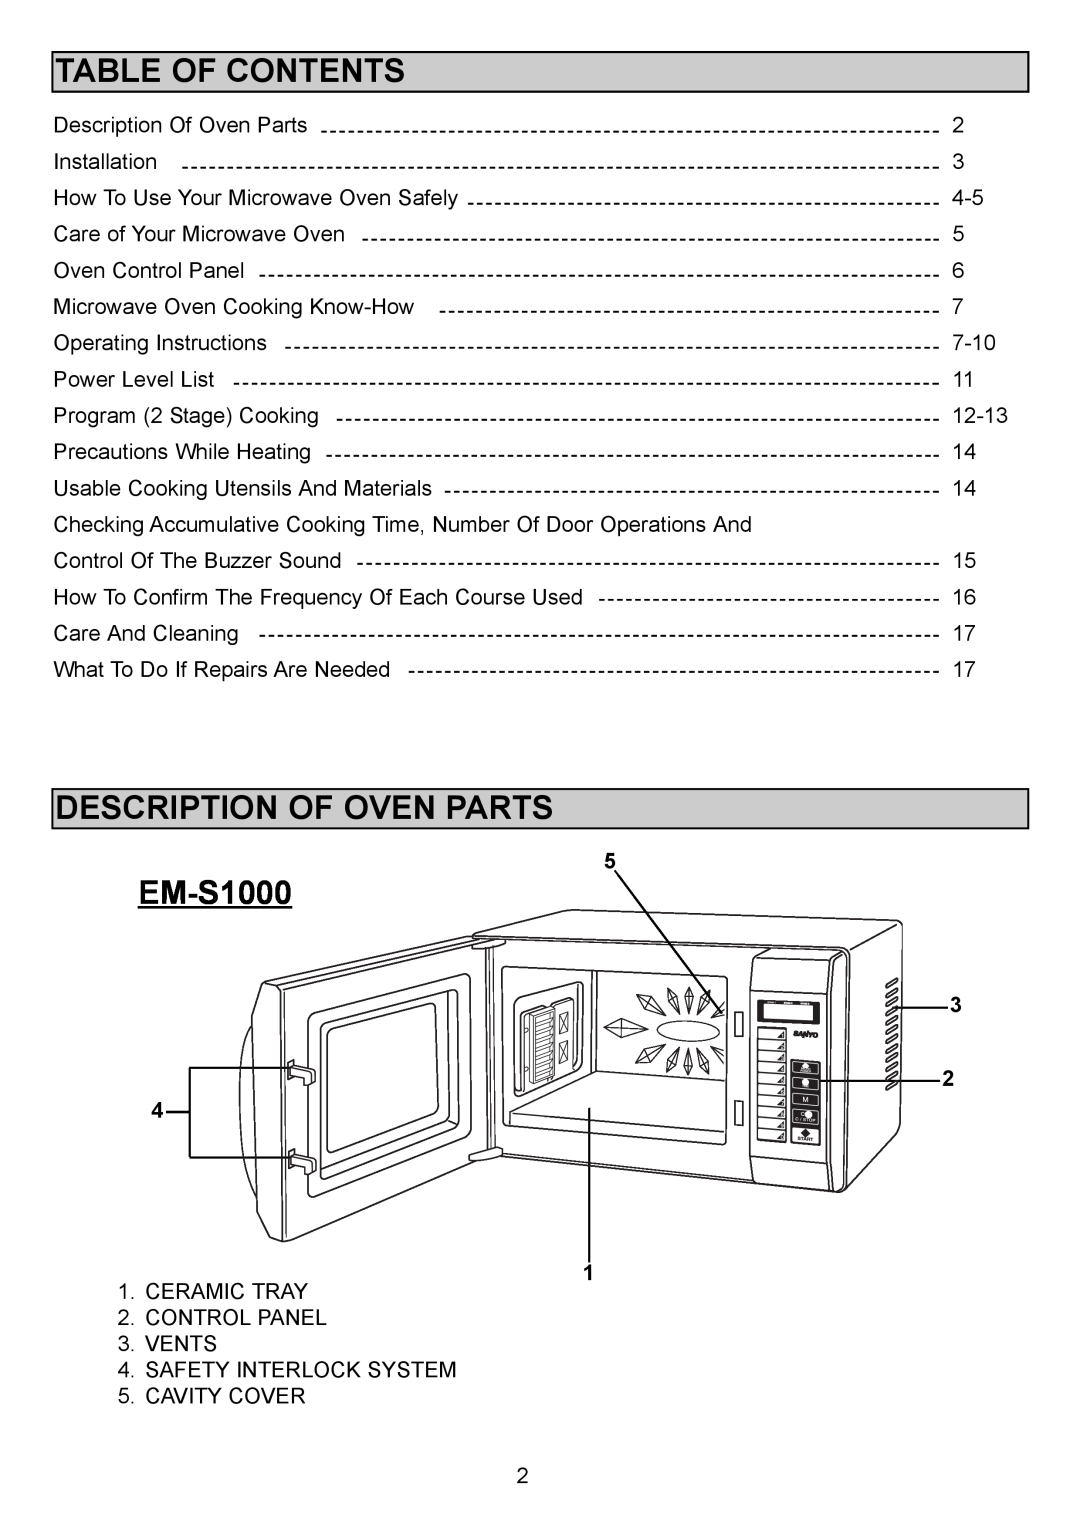 Sanyo EM-S1000 instruction manual Table Of Contents, Description Of Oven Parts 